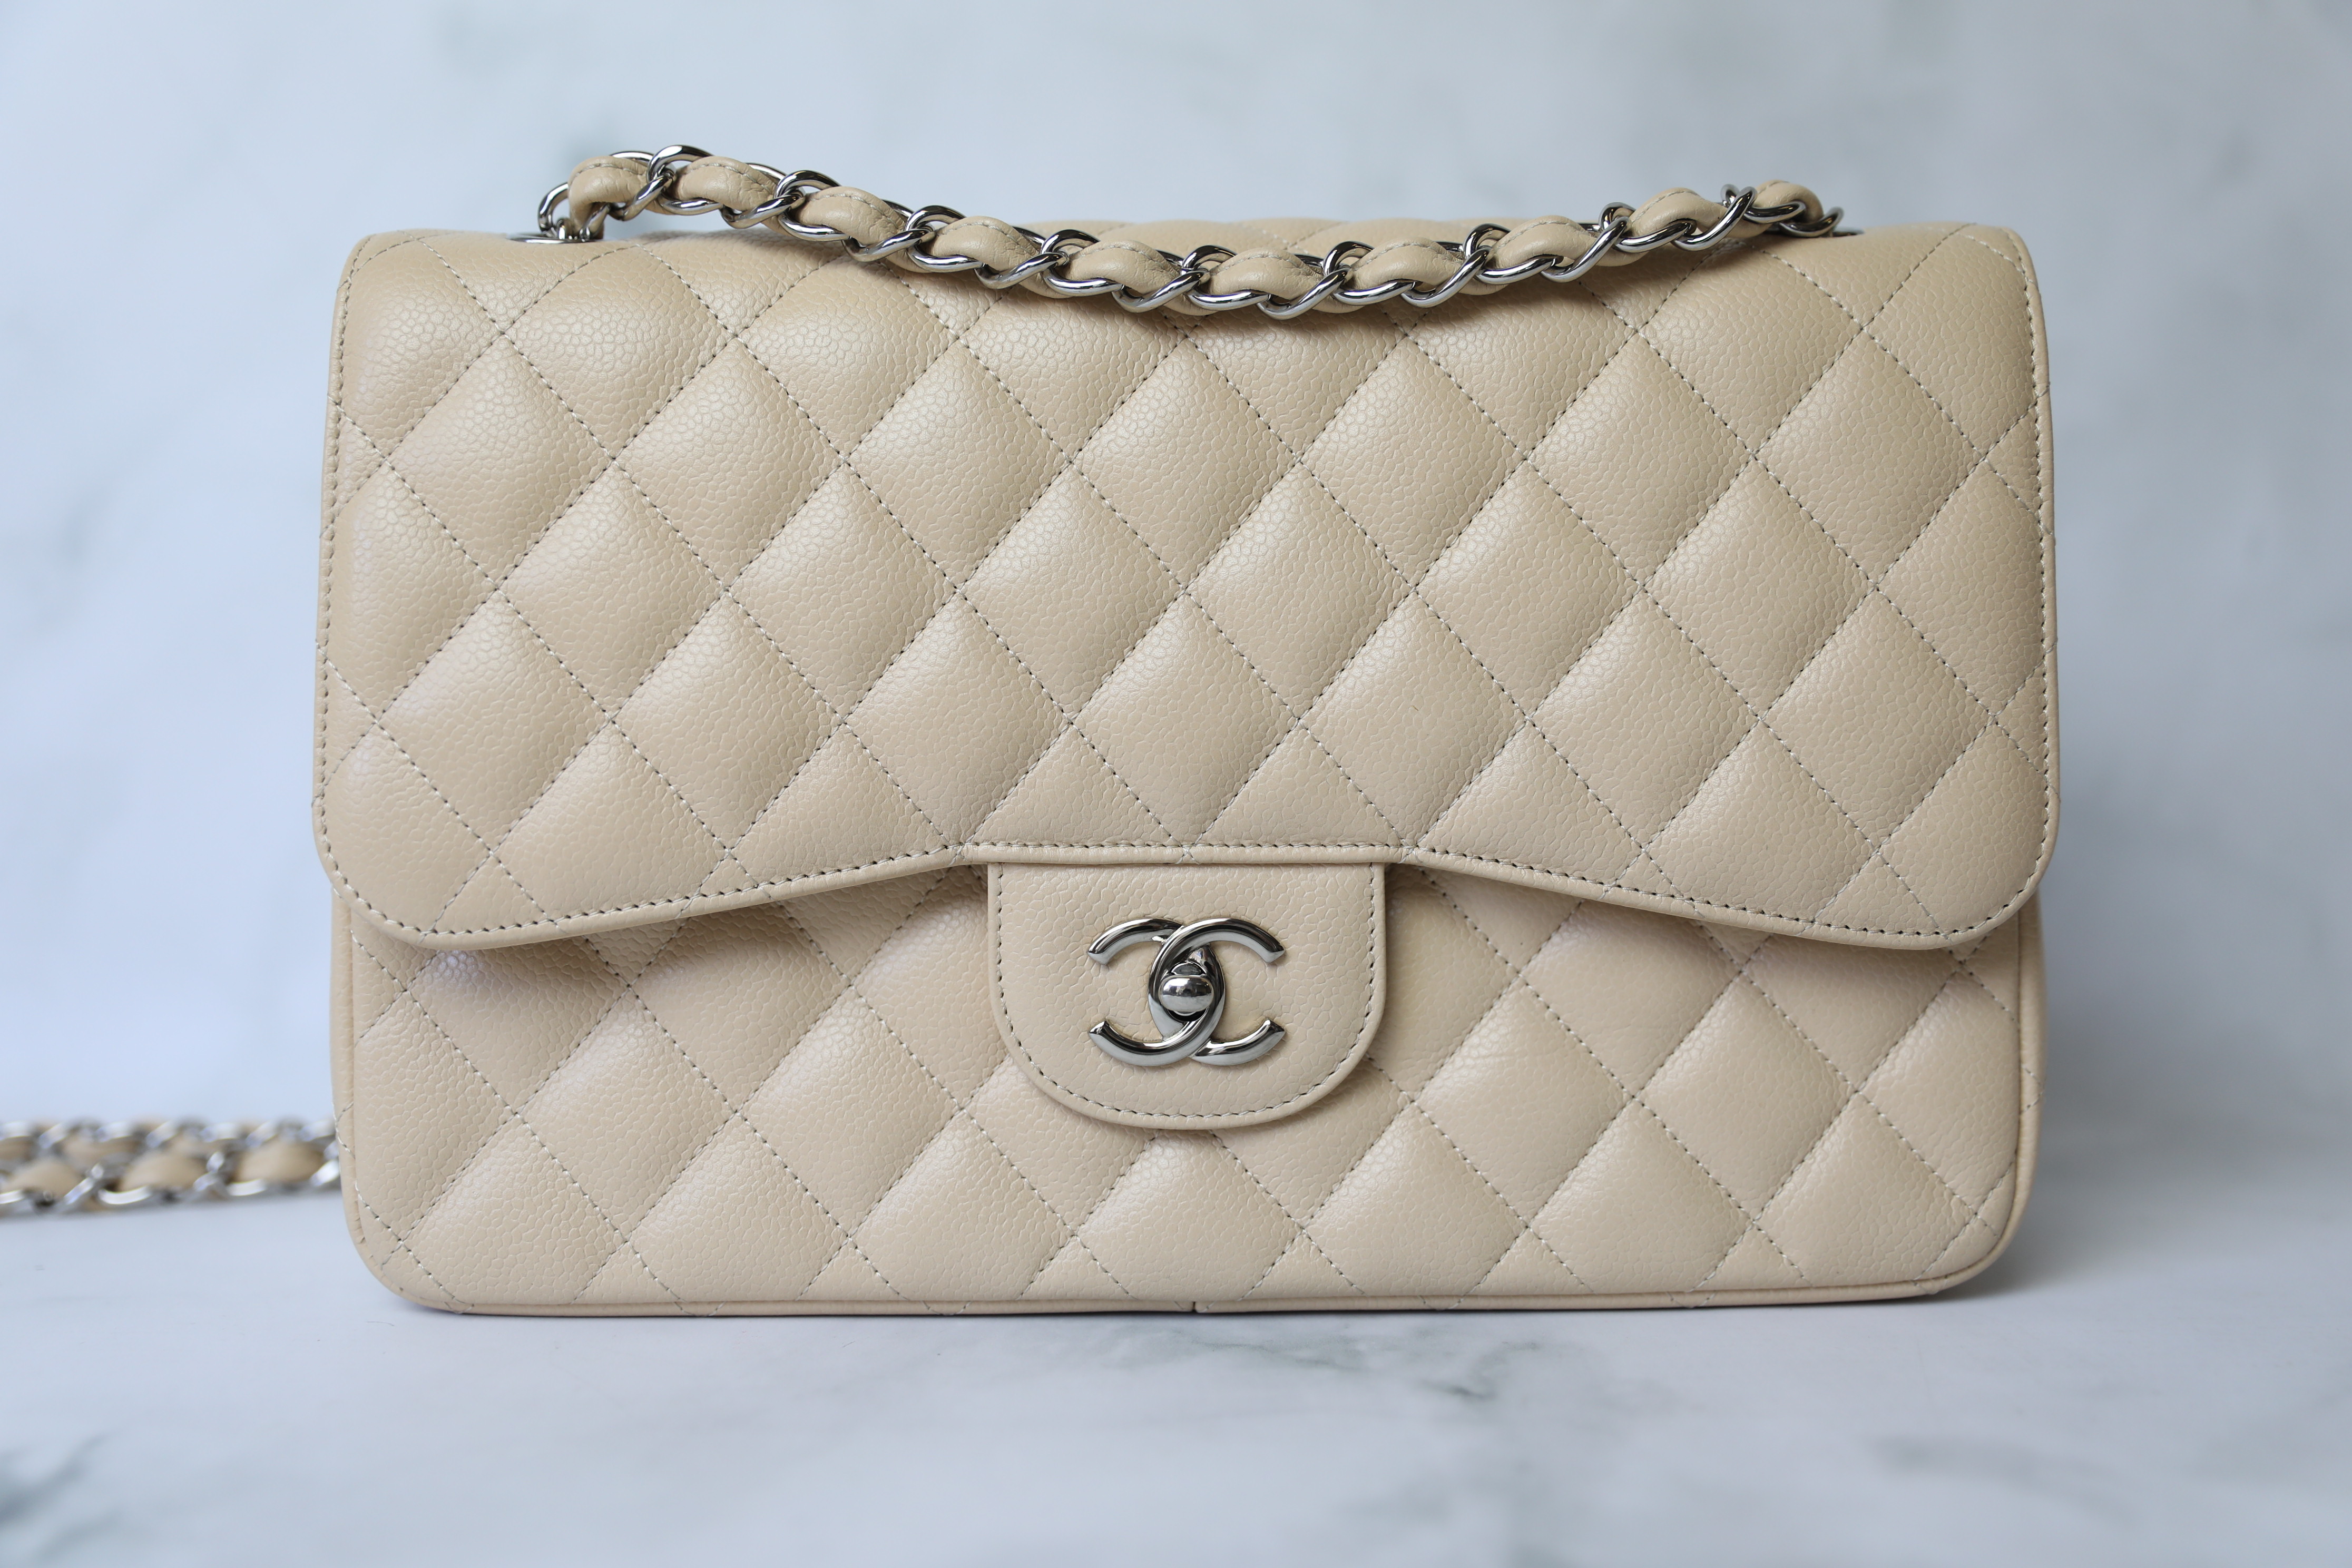 Chanel Jumbo Double Flap Beige Caviar Leather with Silver Hardware